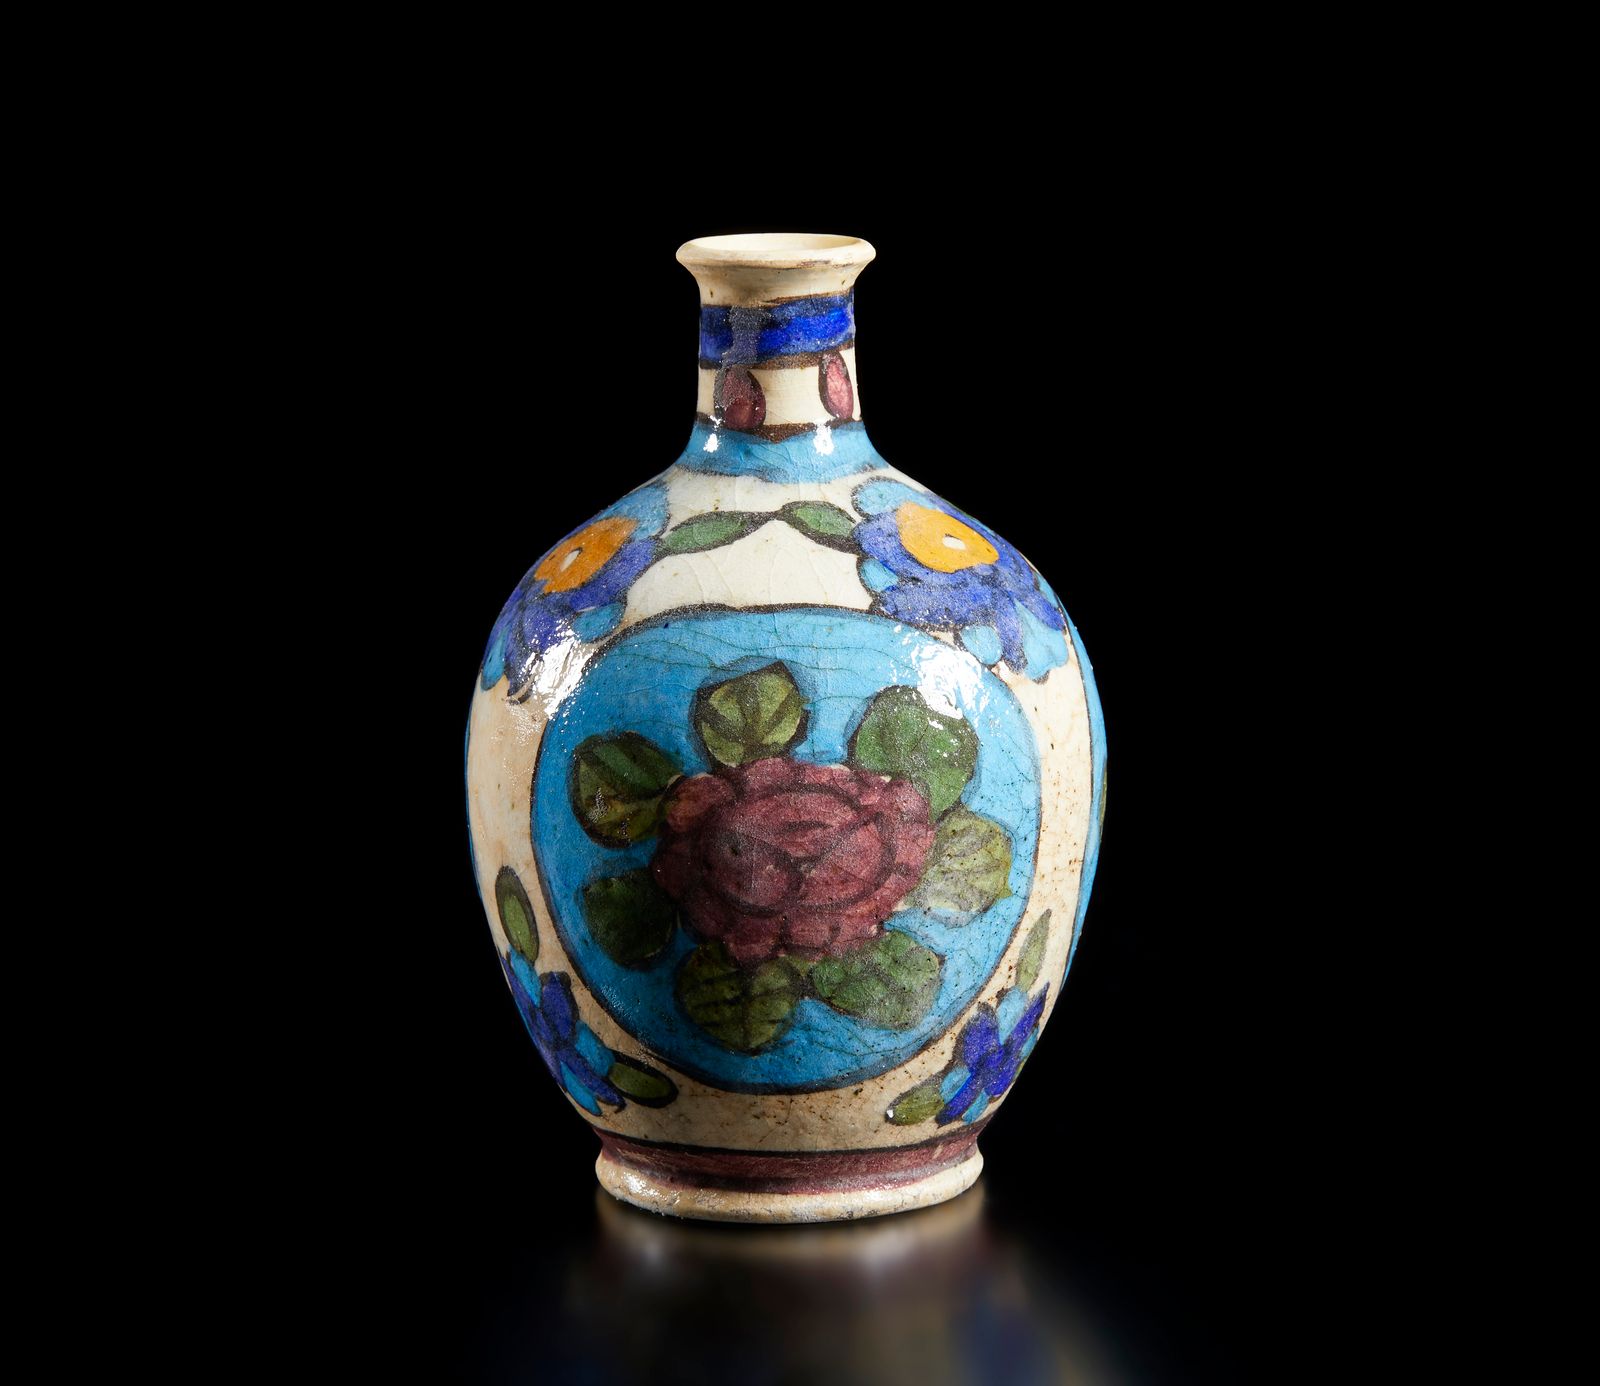 Islamic Art A pottery bottle vase painted with flowers Islamische Kunst. Flasche&hellip;